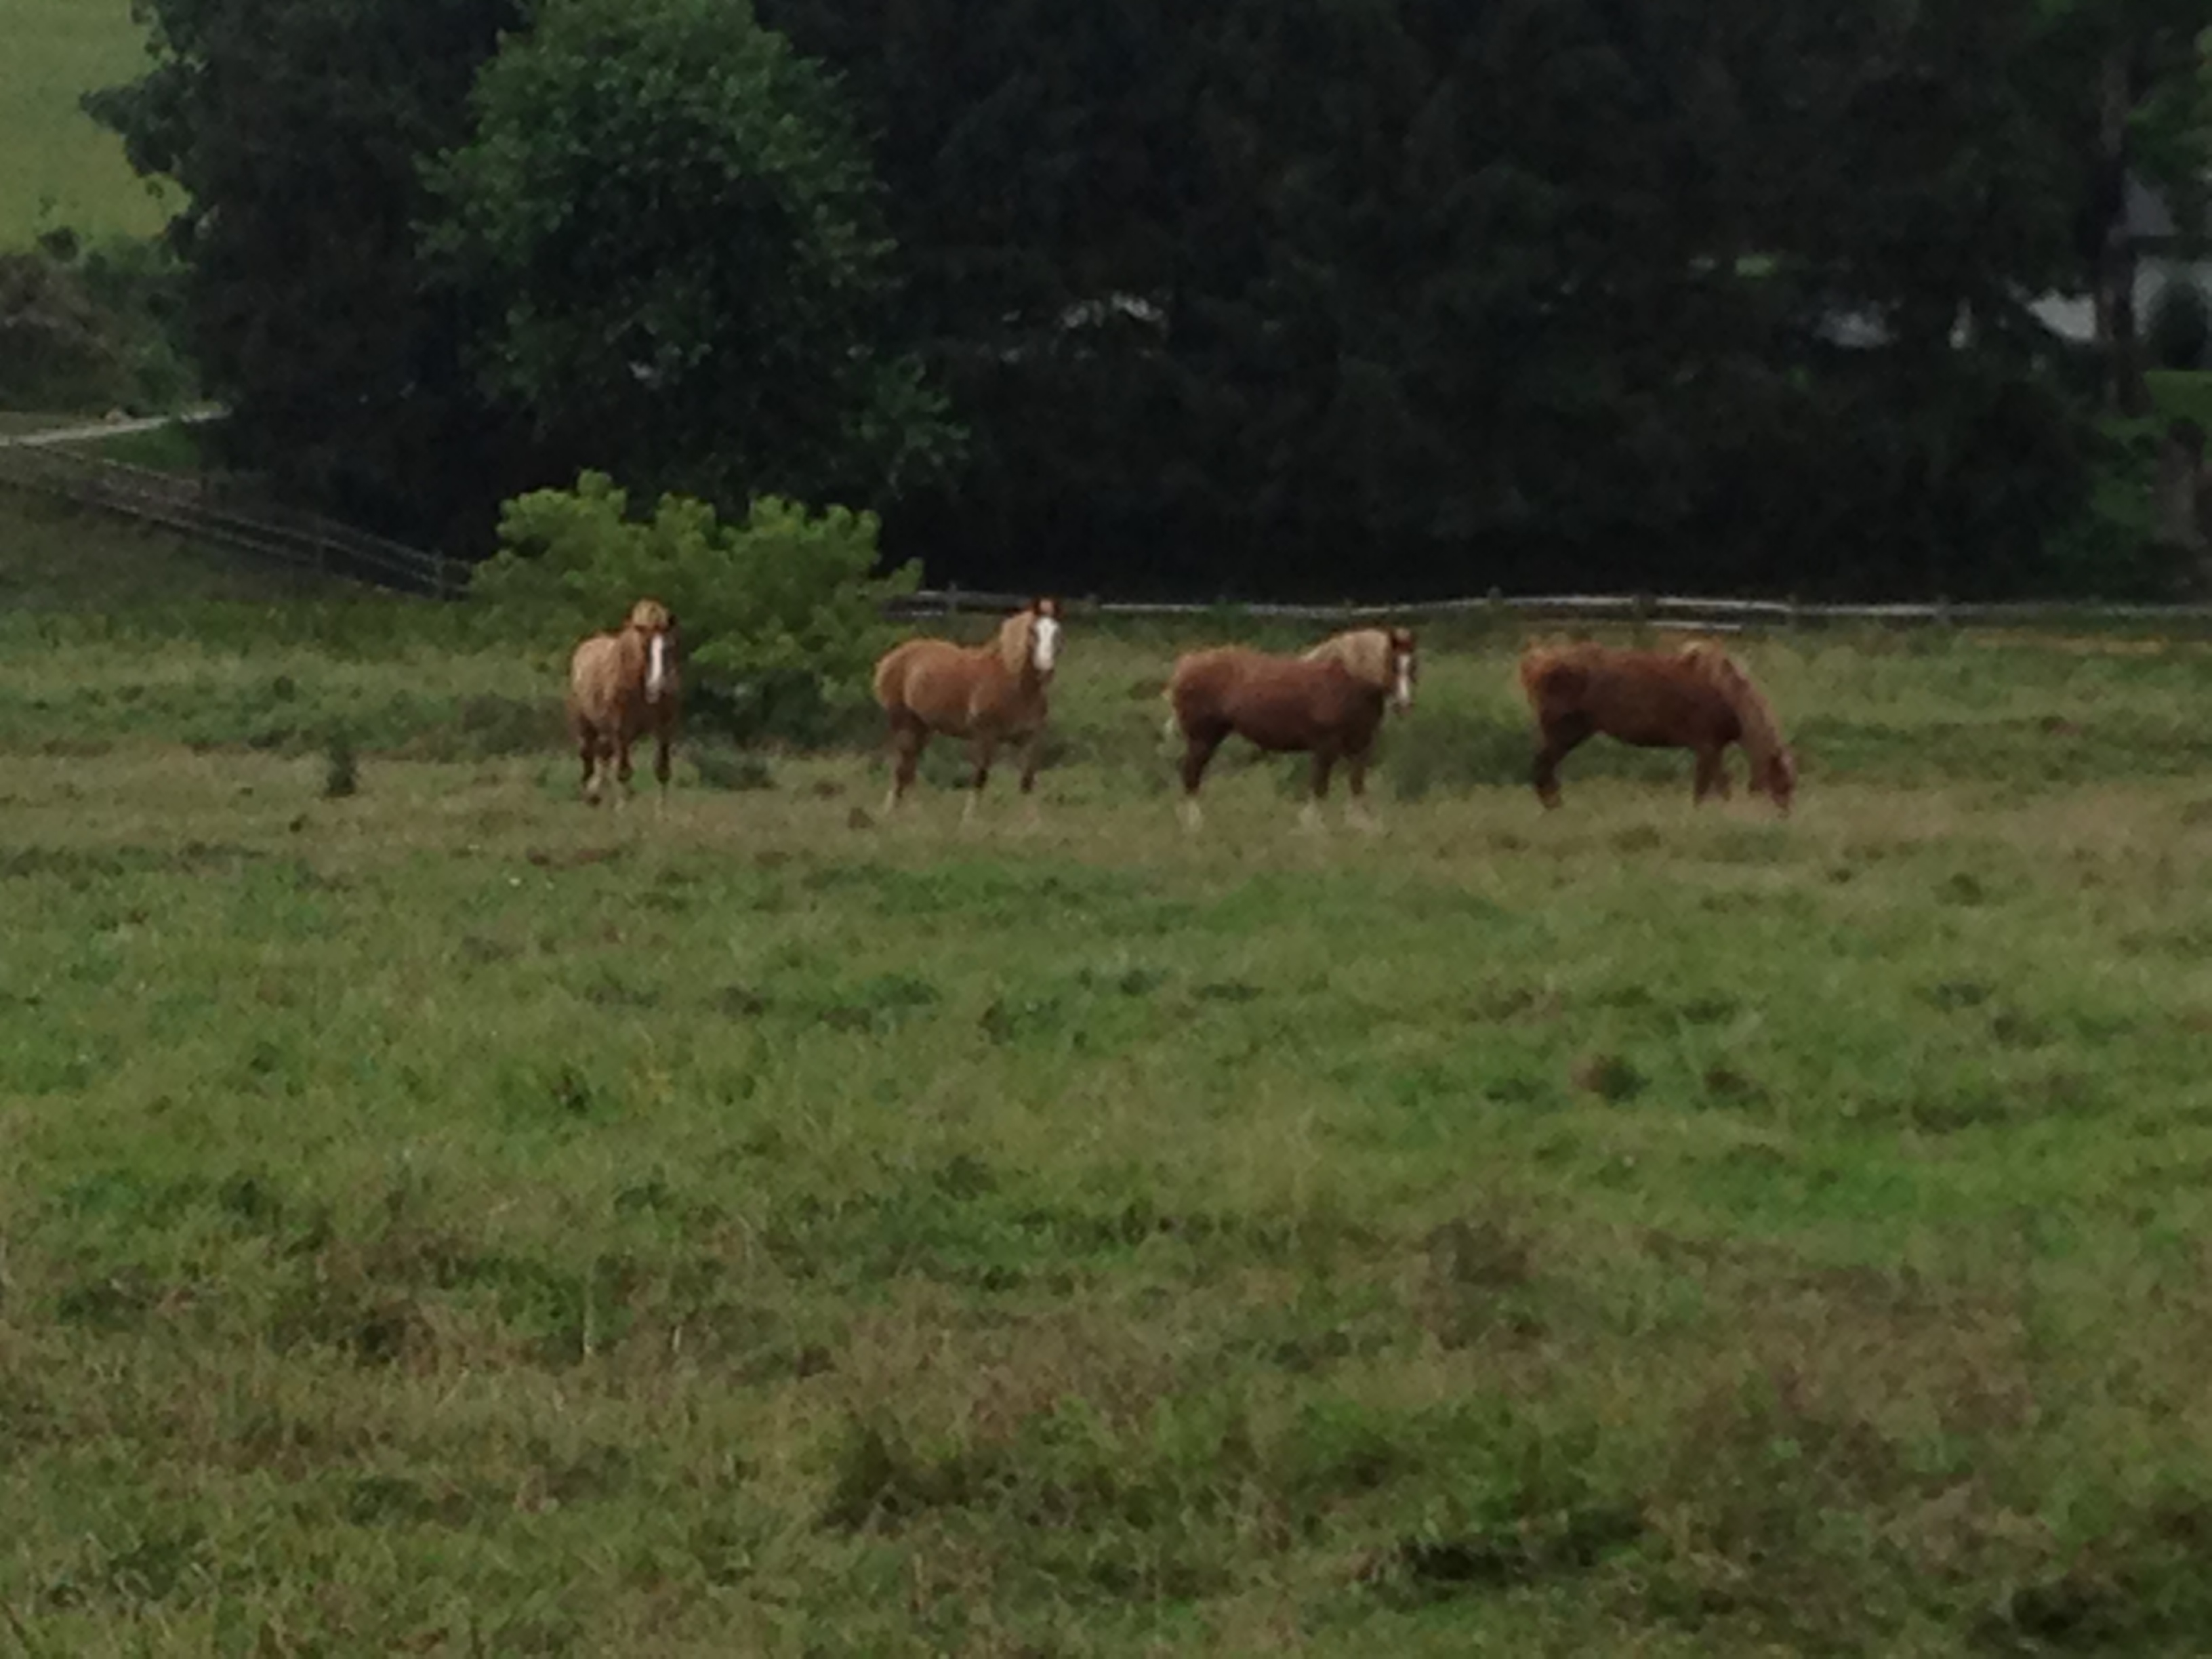 These plowhorses graze in a pasture near Sarah's home.